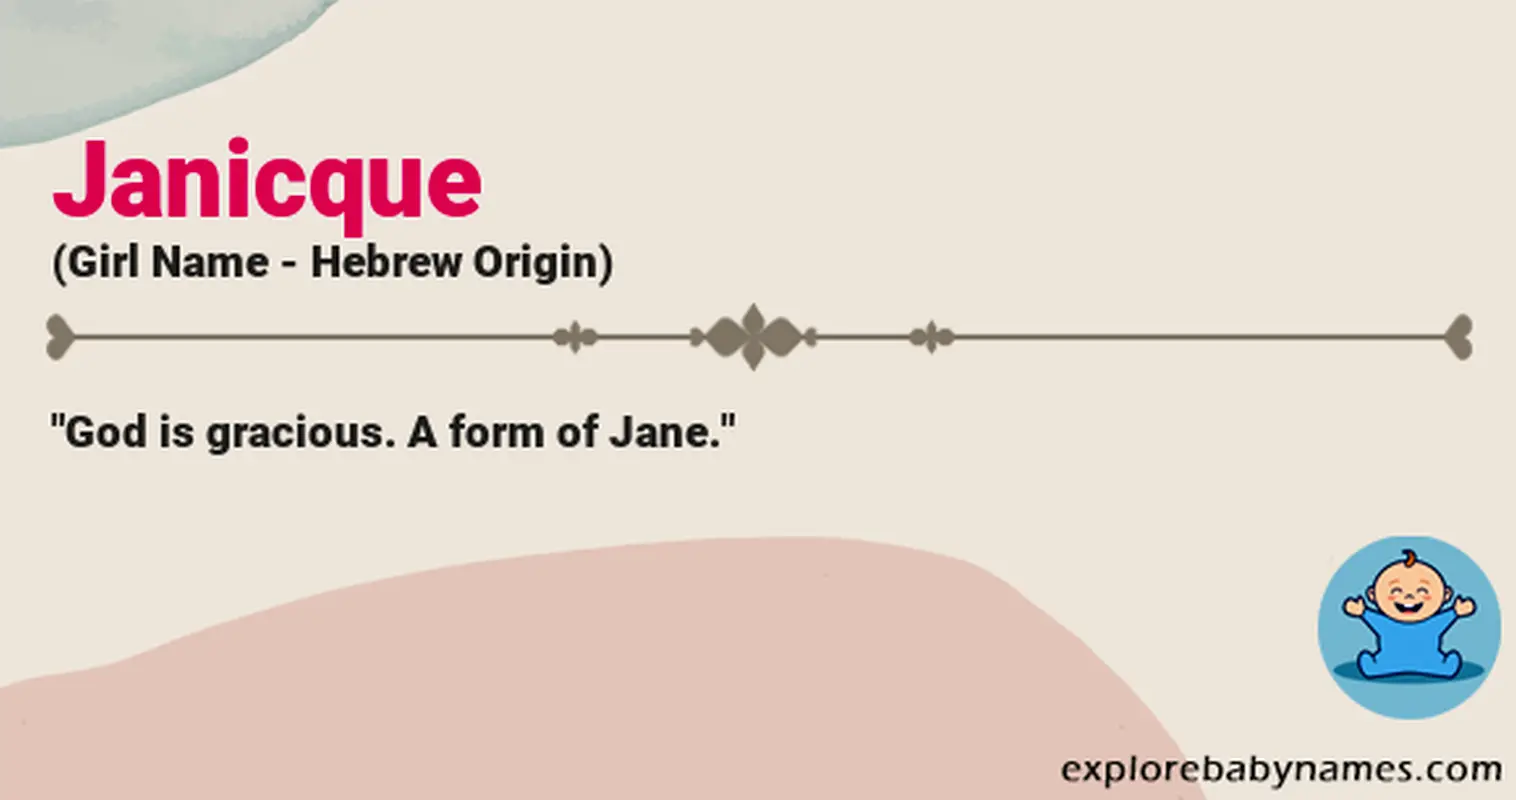 Meaning of Janicque